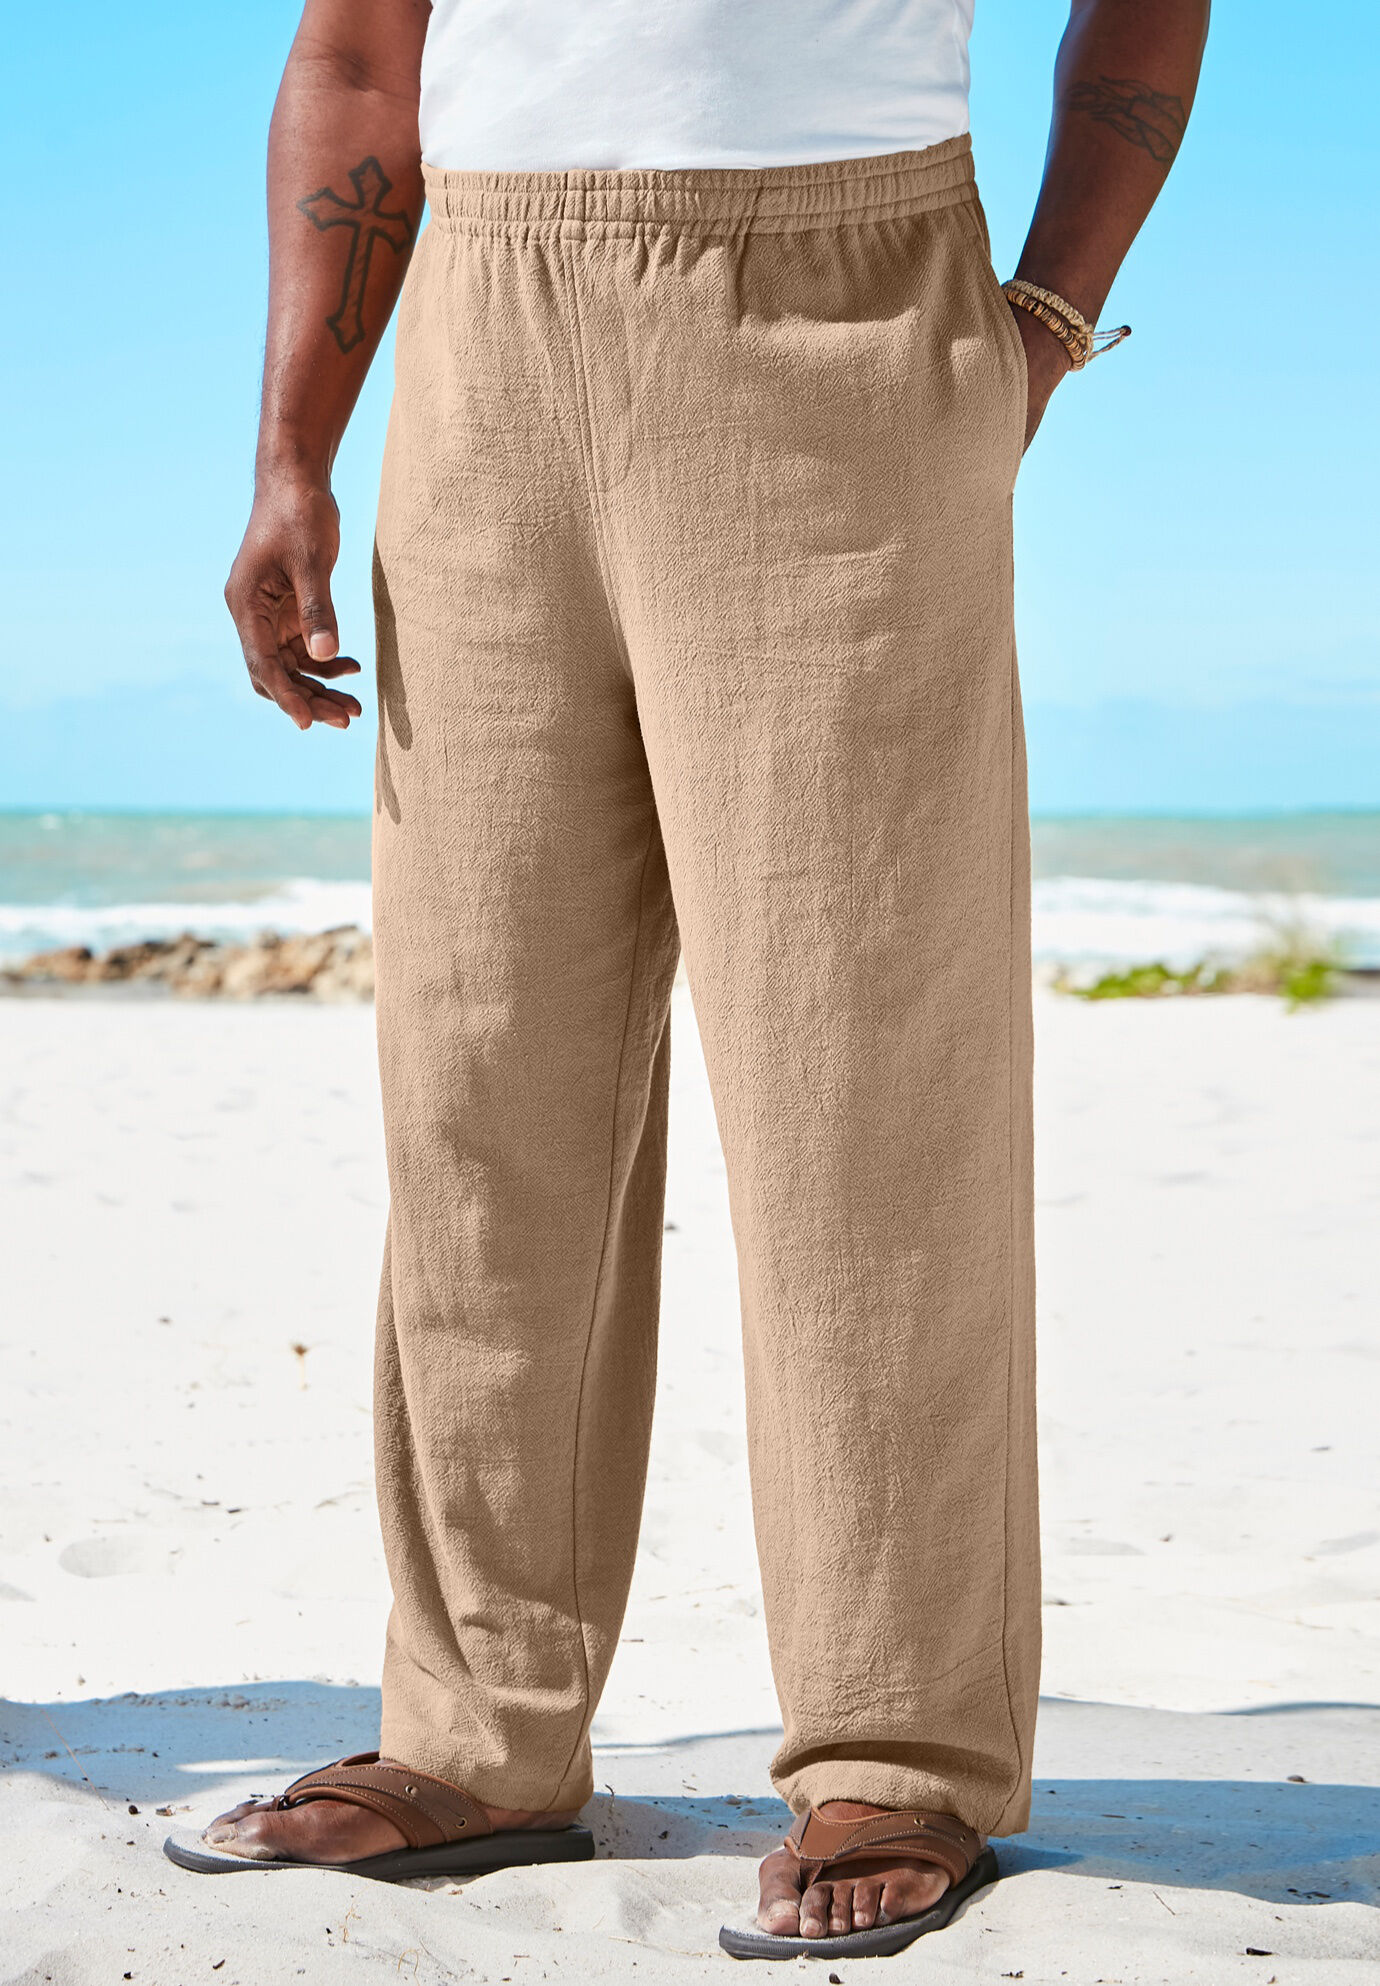 Oh My Gauze beach pants in color snow one size fits all | Beach pants, One  size fits all, Color